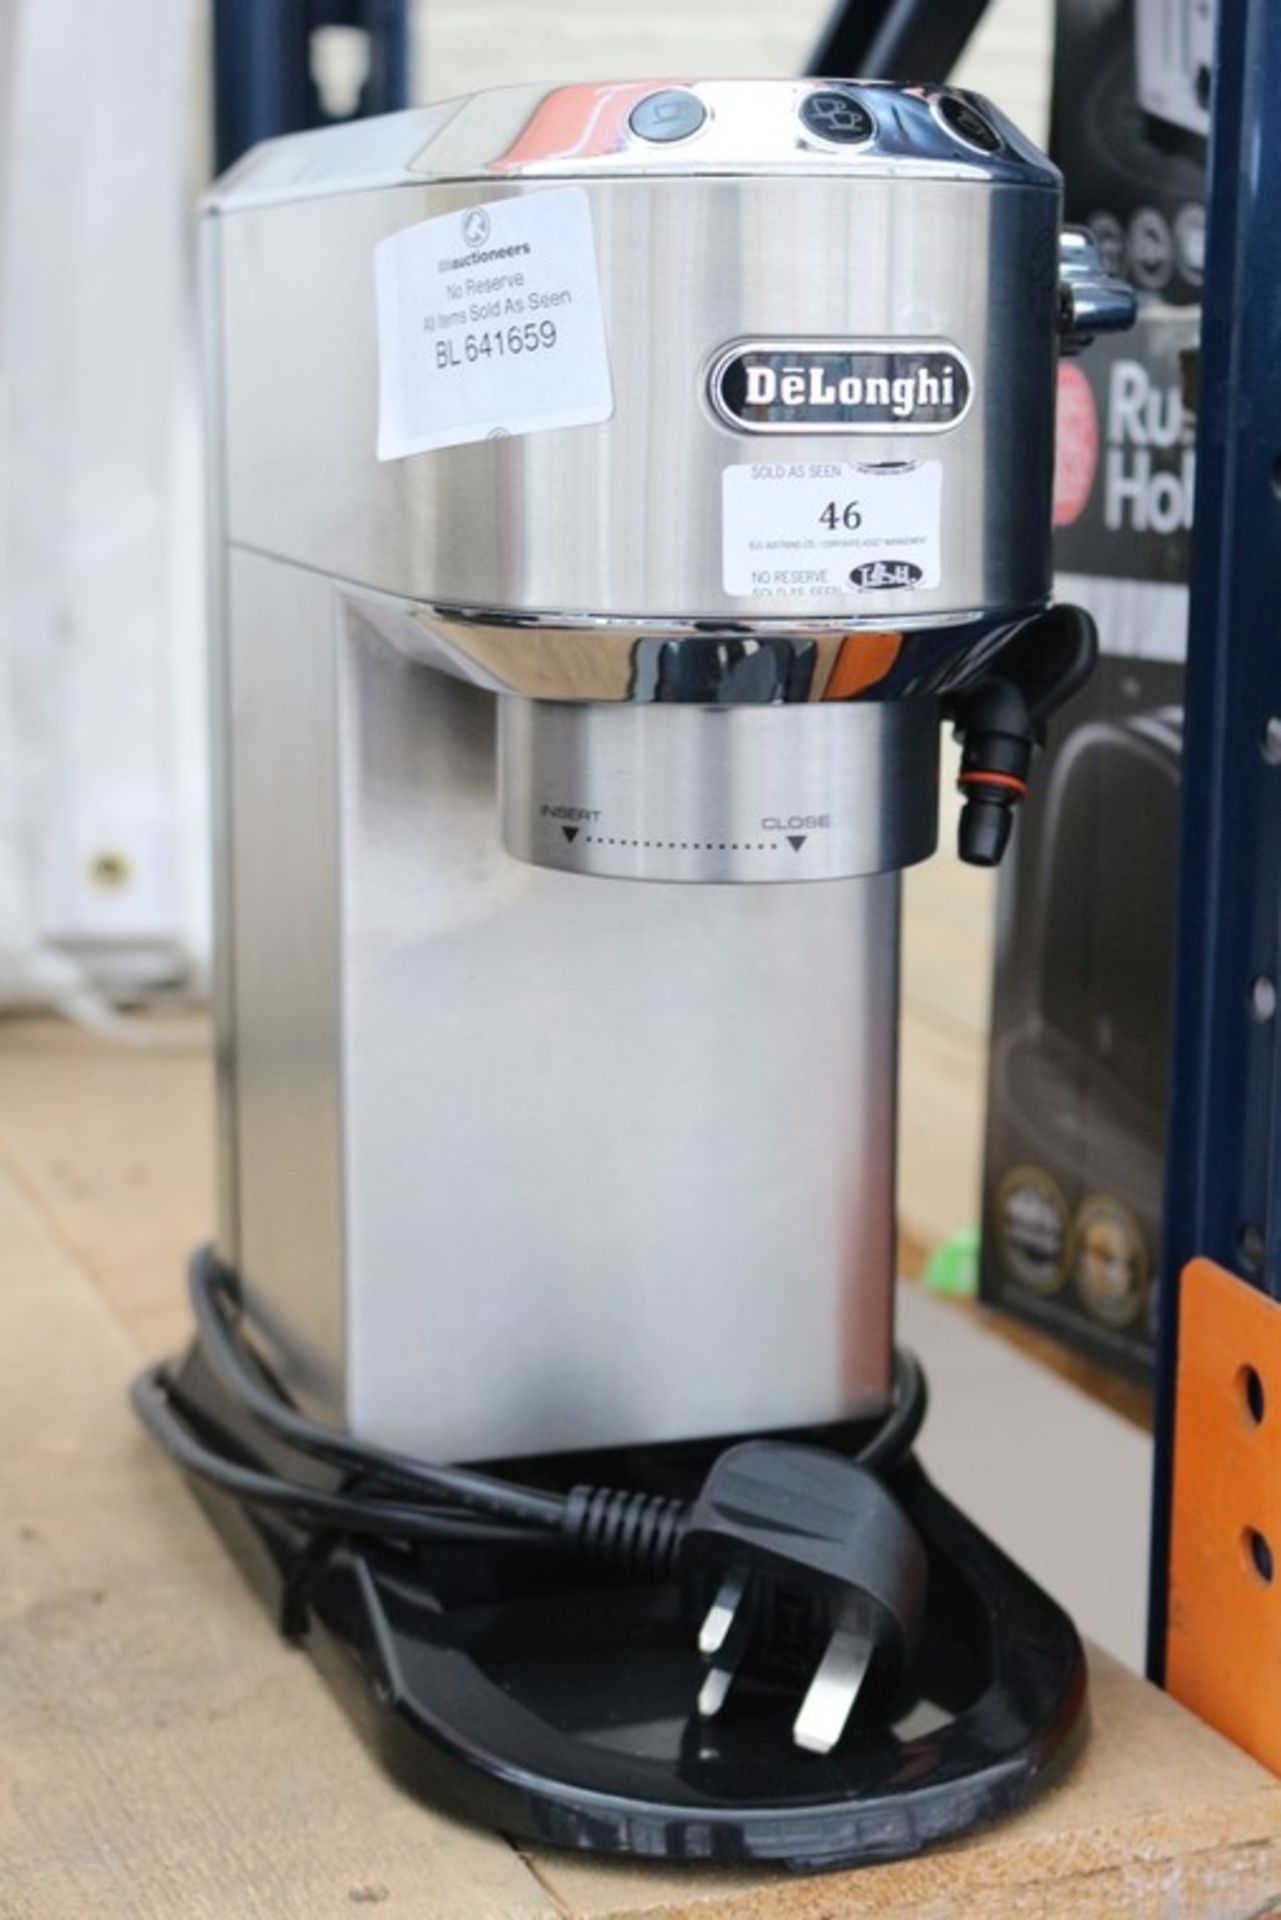 1 x DELONGHI DEDICA STAINLESS STEEL CAPPUCCINO COFFEE MAKER RRP £150 *PLEASE NOTE THAT THE BID PRICE